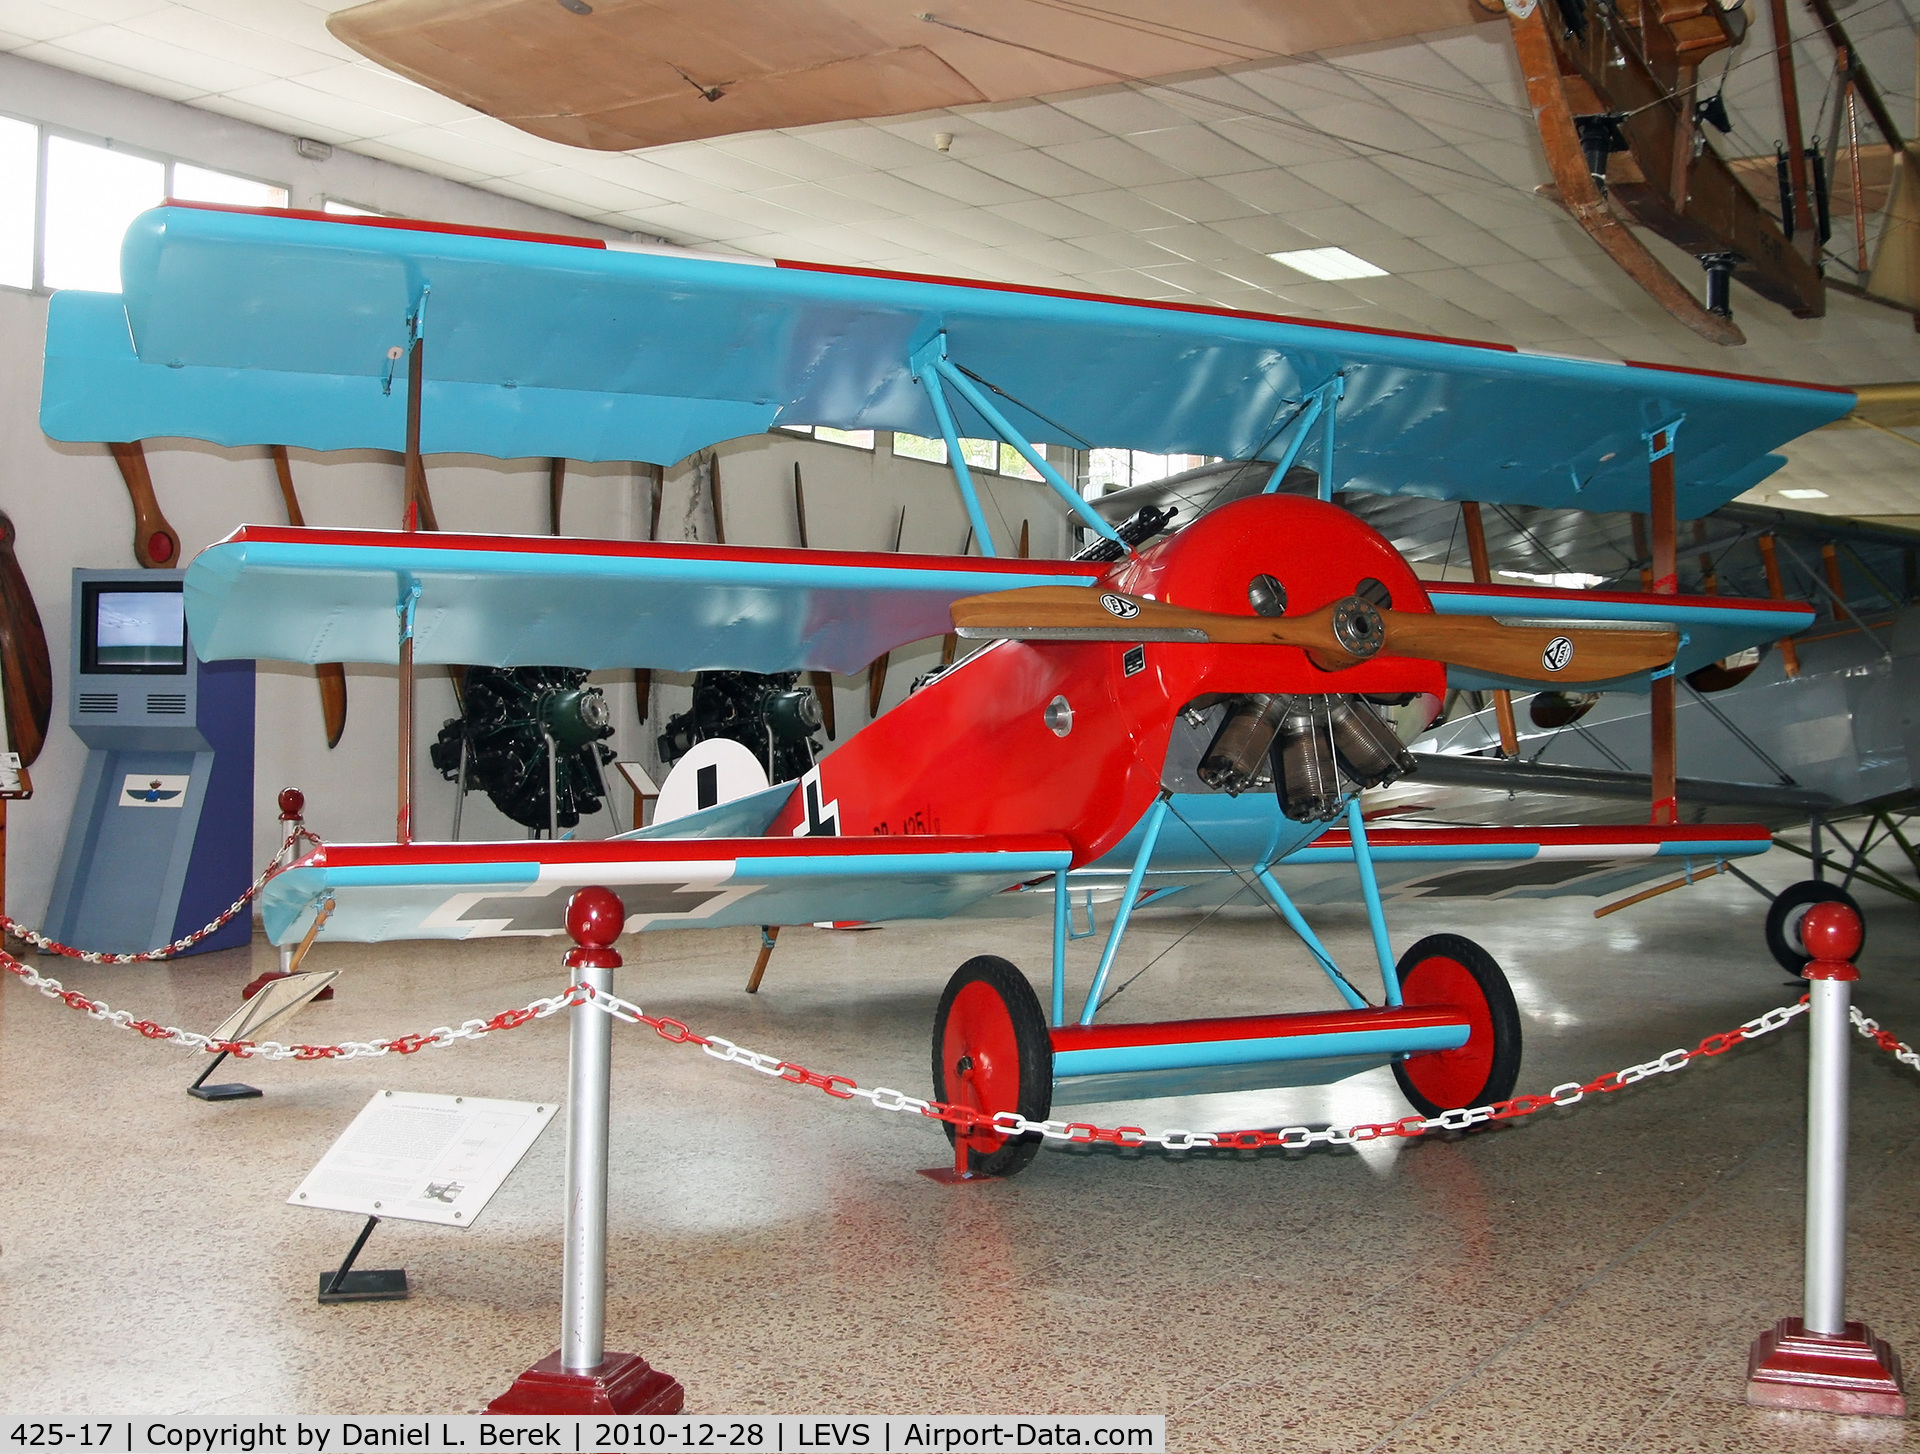 425-17, 1992 Fokker Dr.1 Triplane Replica C/N Not found 425/17 (2), This aircraft was built to replace the 1917 original, which was lost in a fire at the Expo '92 at Seville.